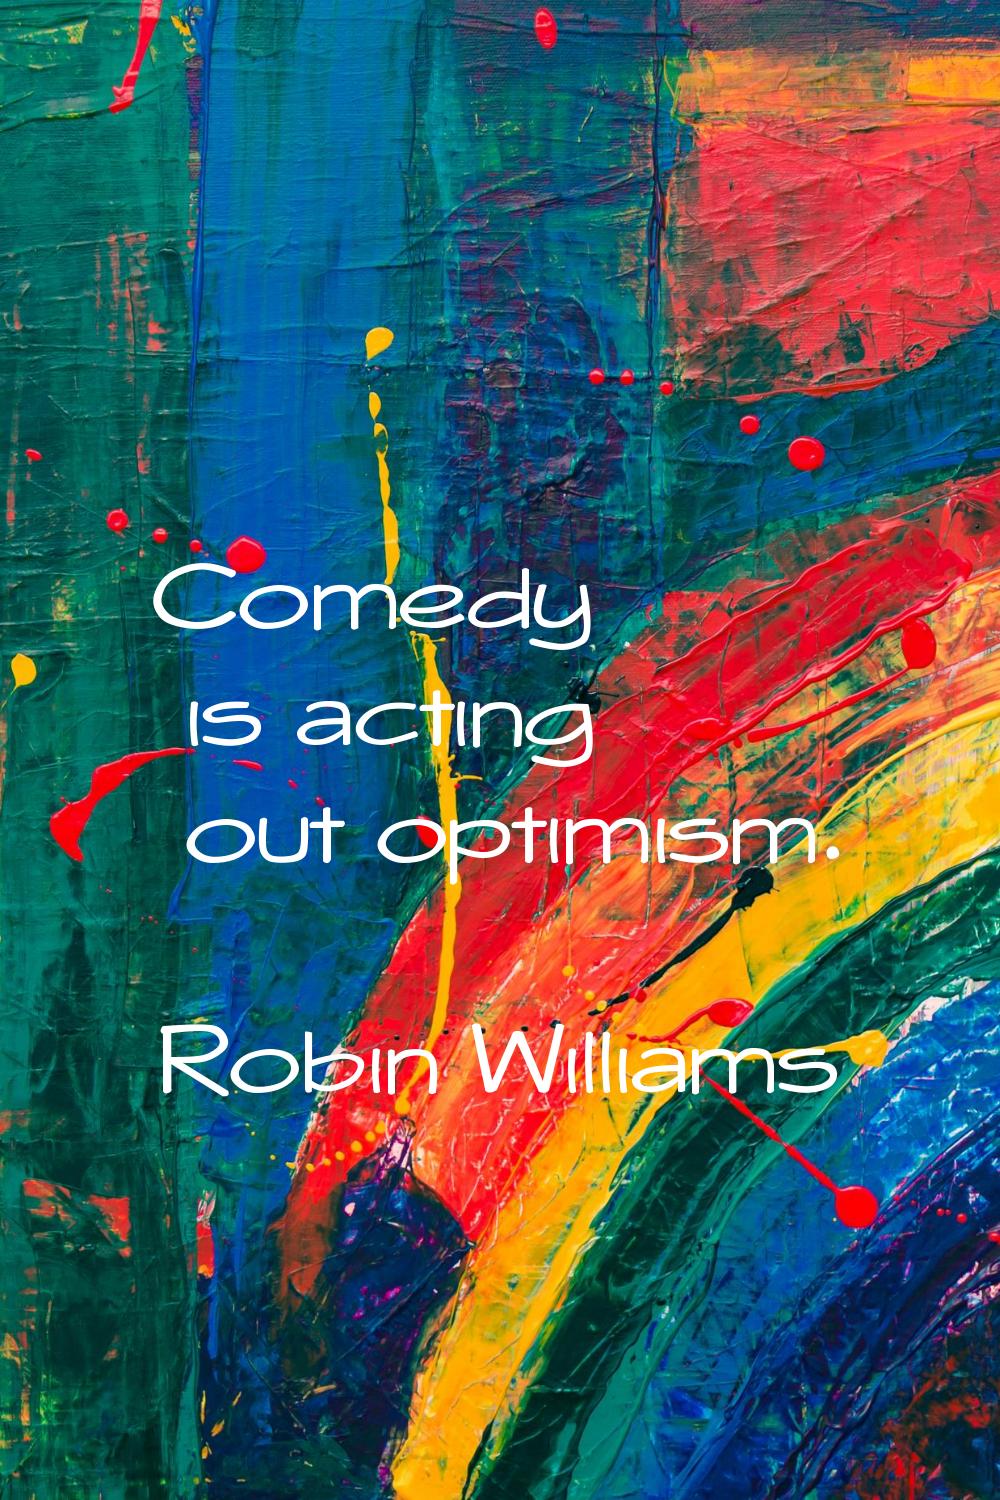 Comedy is acting out optimism.